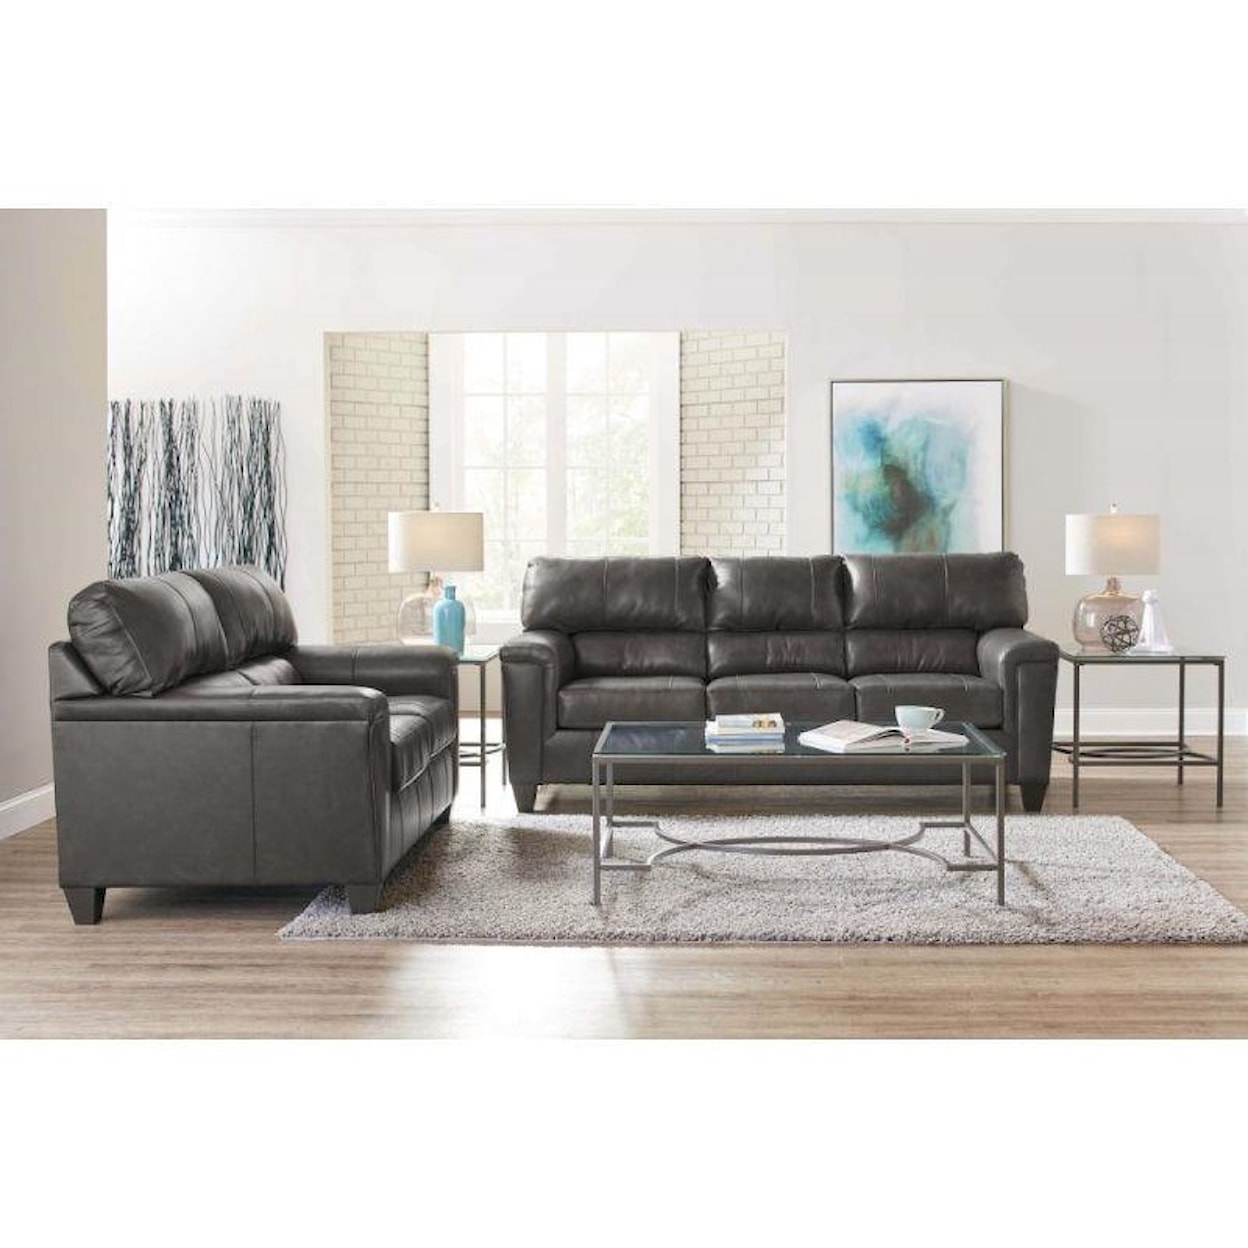 VFM Signature Soft Touch Living Room Group